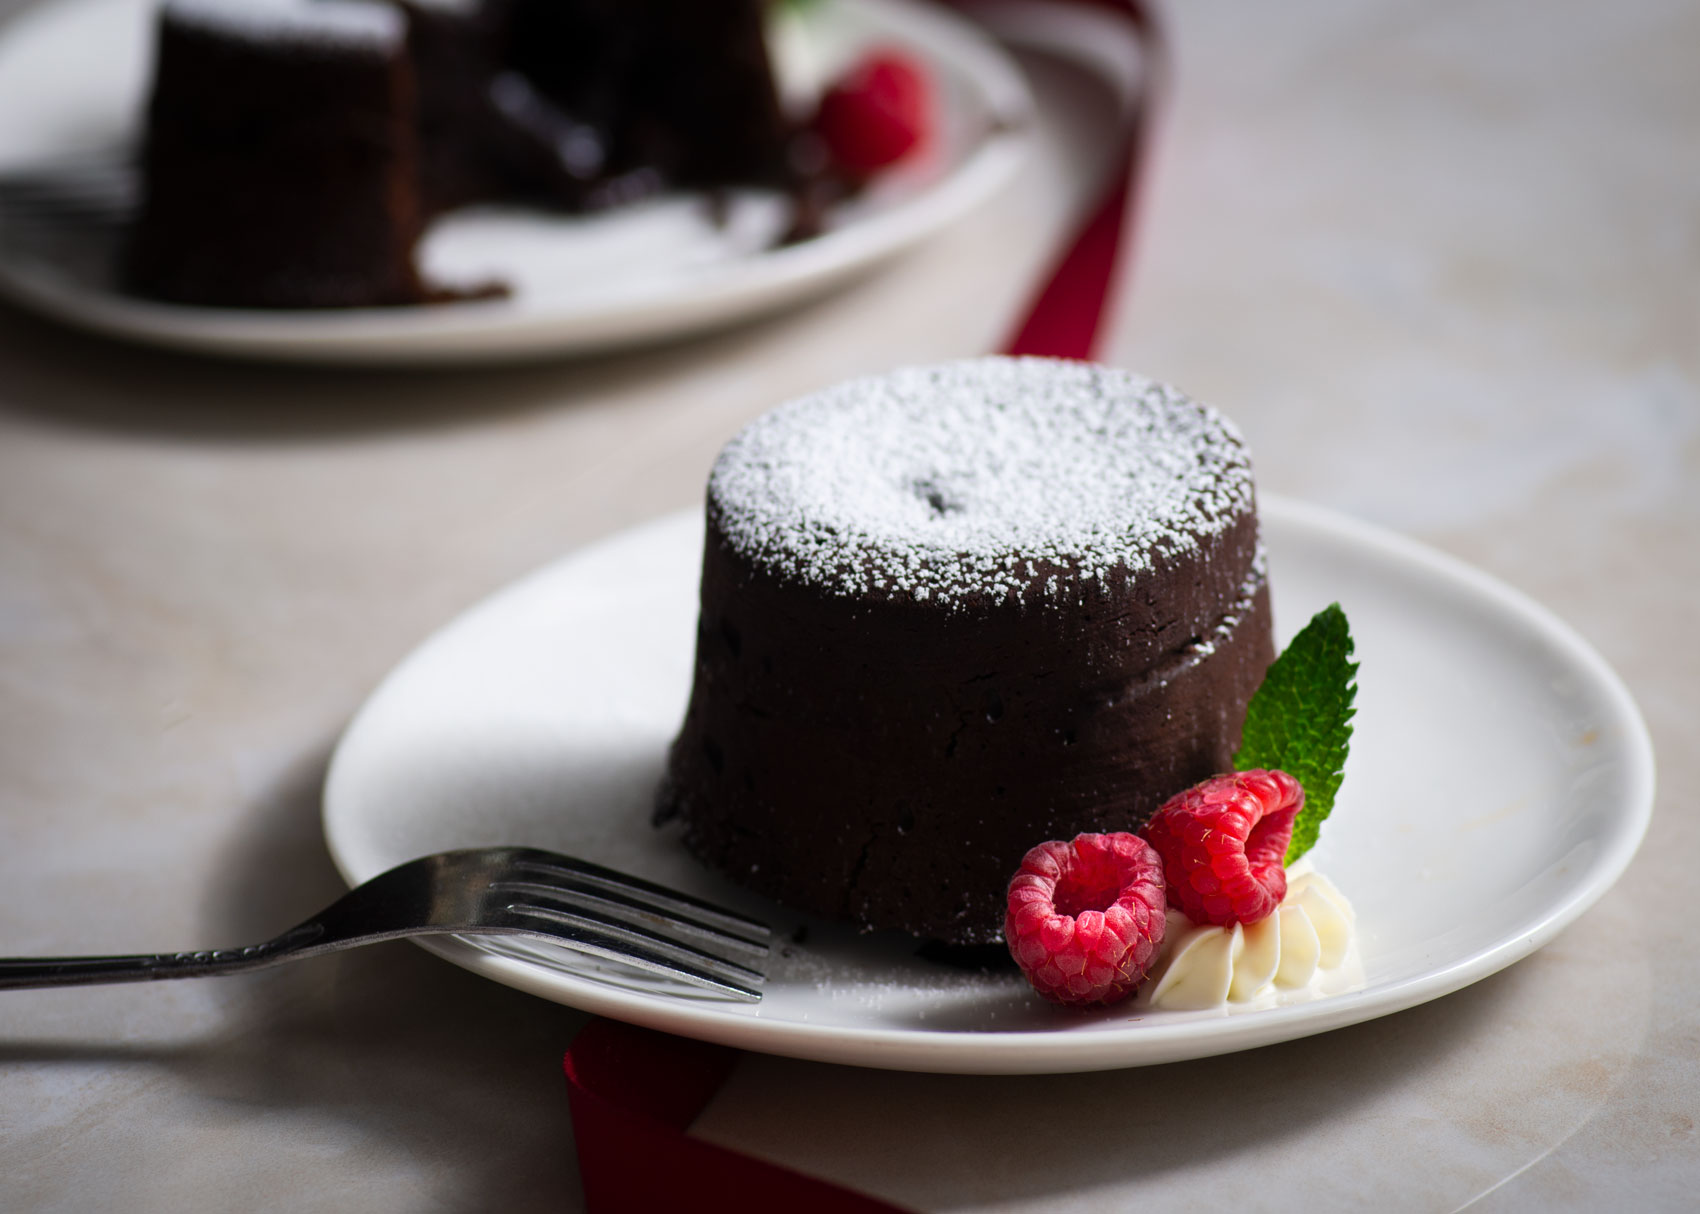 Get Ready to Melt with Choco Lava Cake Deliciousness!